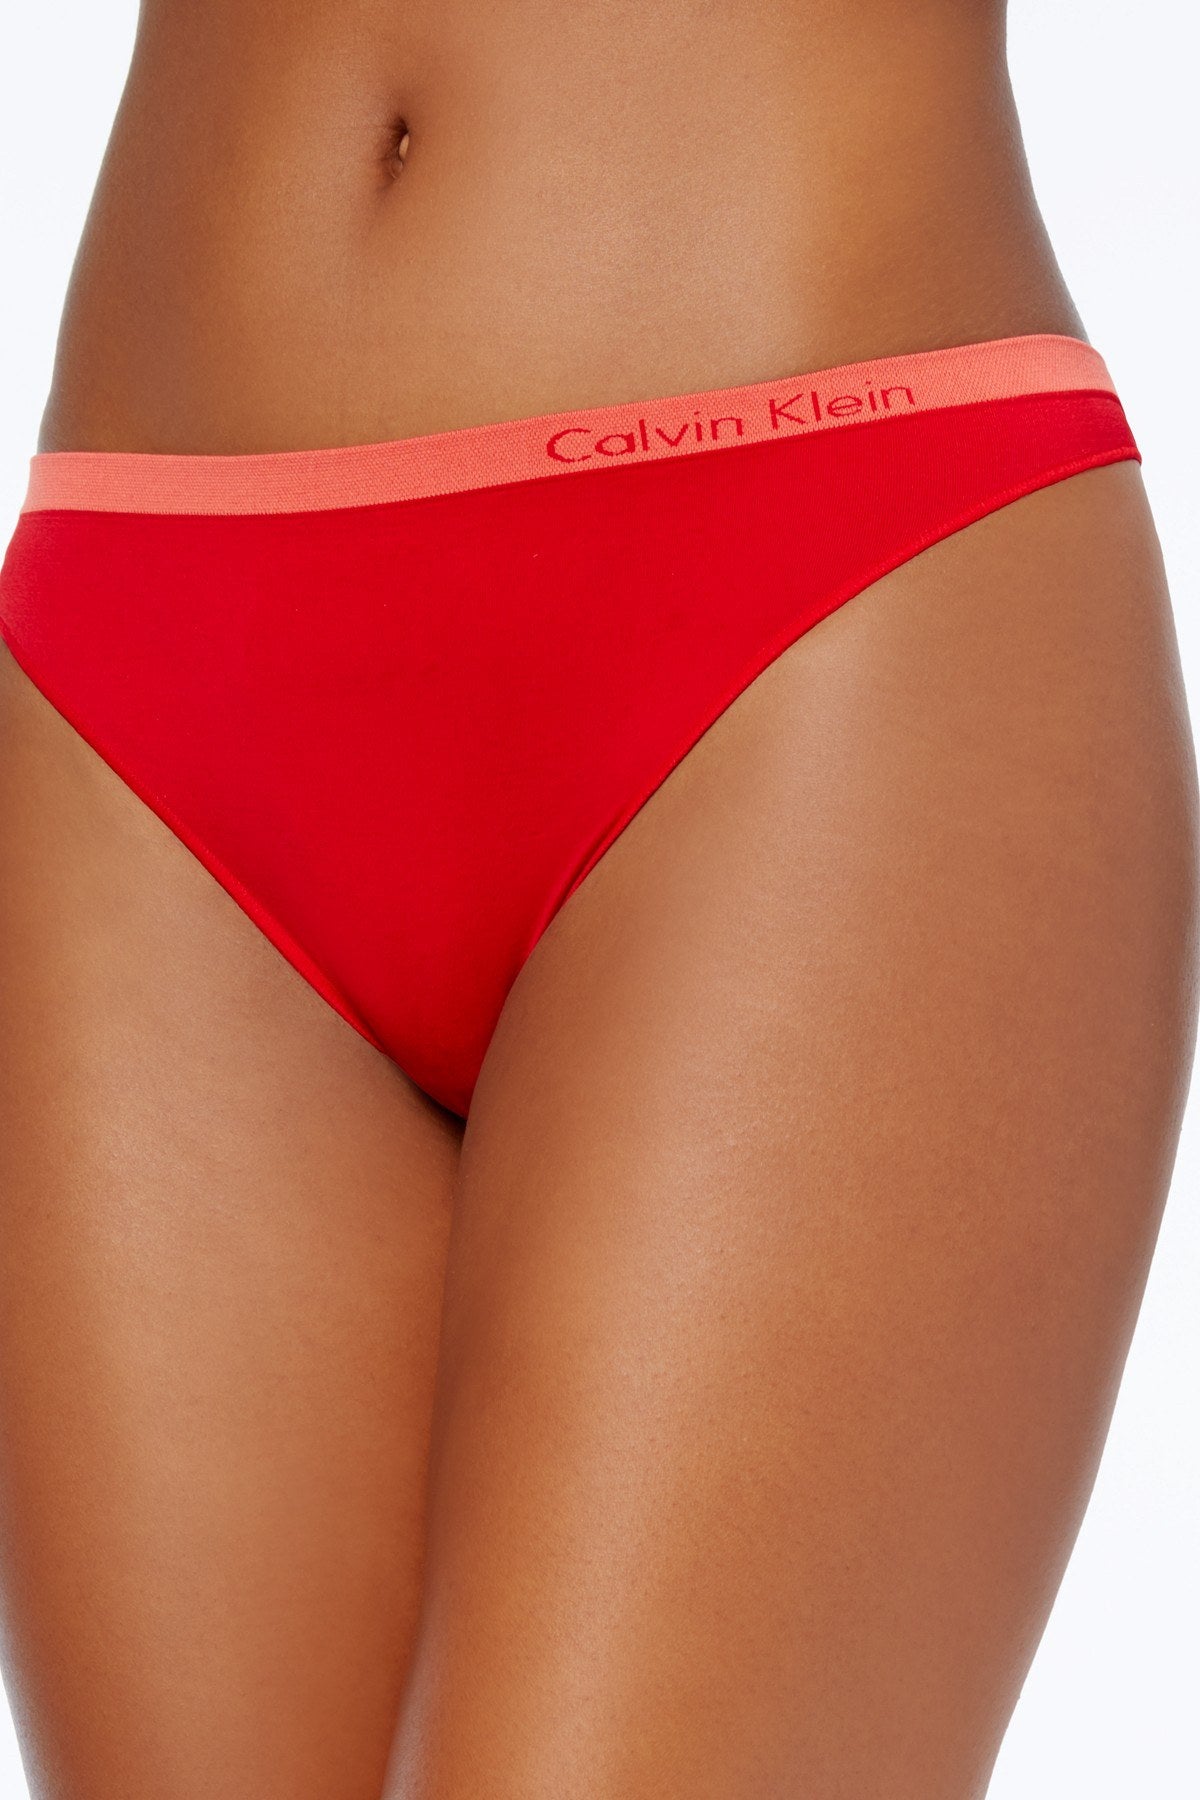 Calvin Klein Empower-Red Pure Seamless Thong